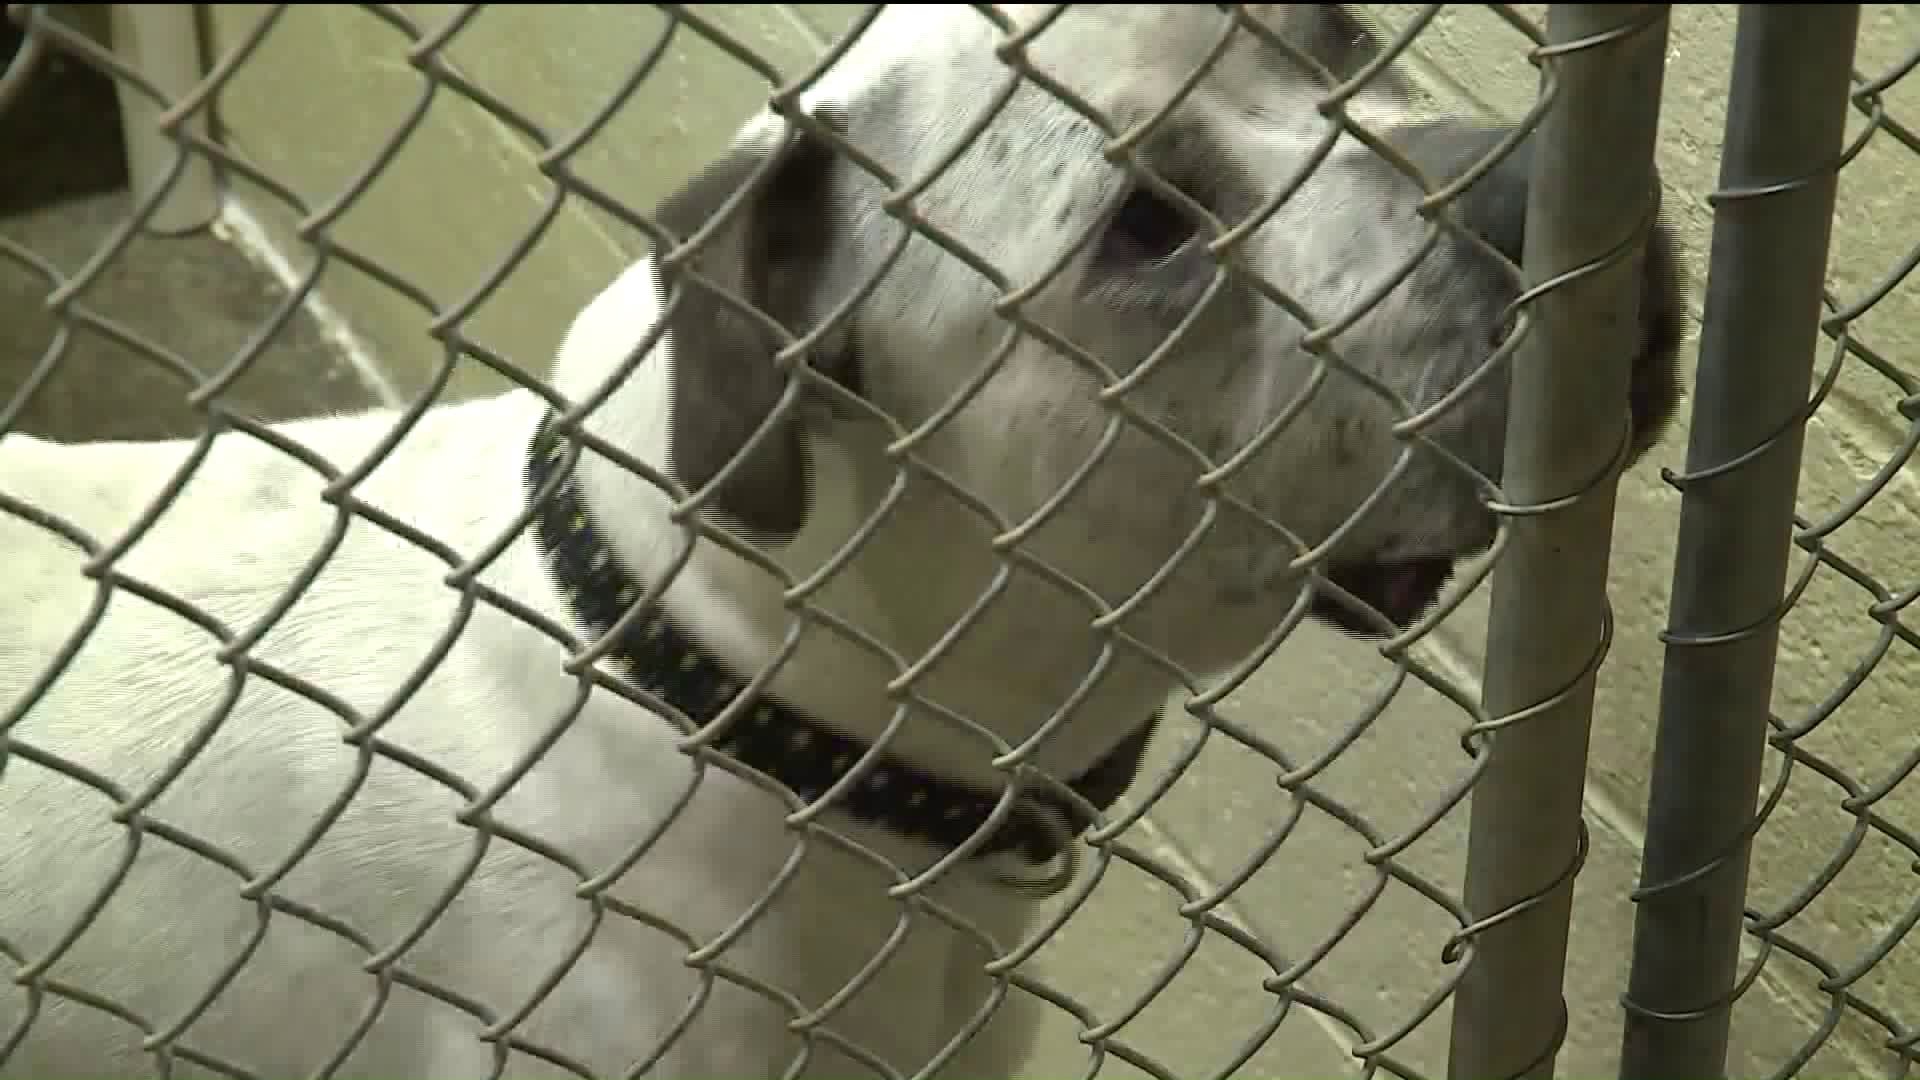 Social media helping animal abuse cases